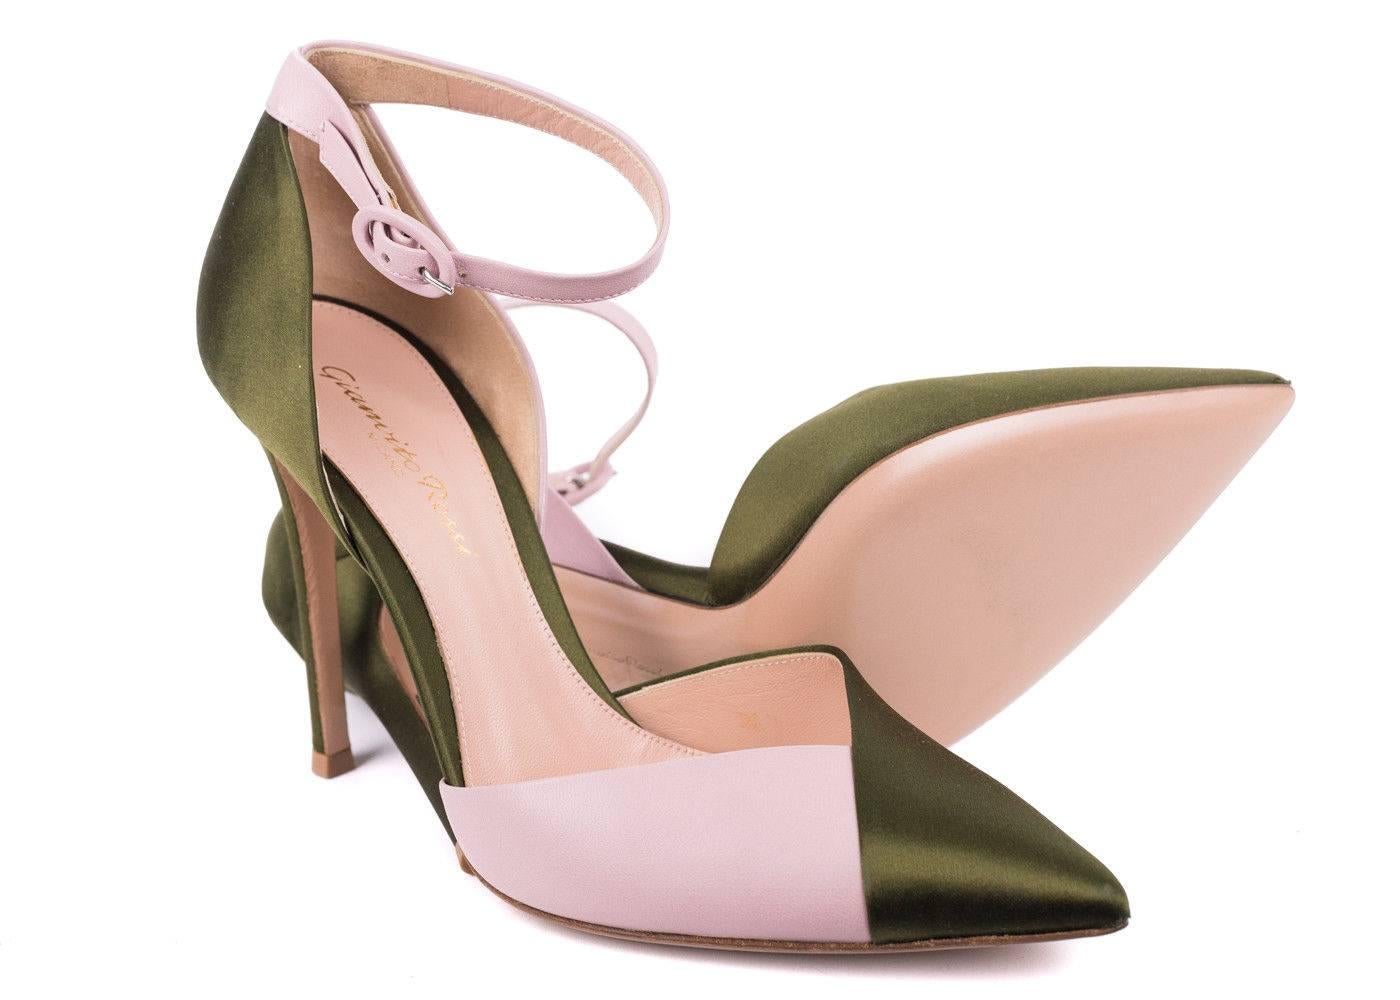 Compliment yourself well with love and grace in your Mixed Gianvito Rossi Heels. This pump features green silk like satin,  pale pink leather fusions, and a 4 inch stiletto heel infused together creating this work of art. You can pair this shoe with